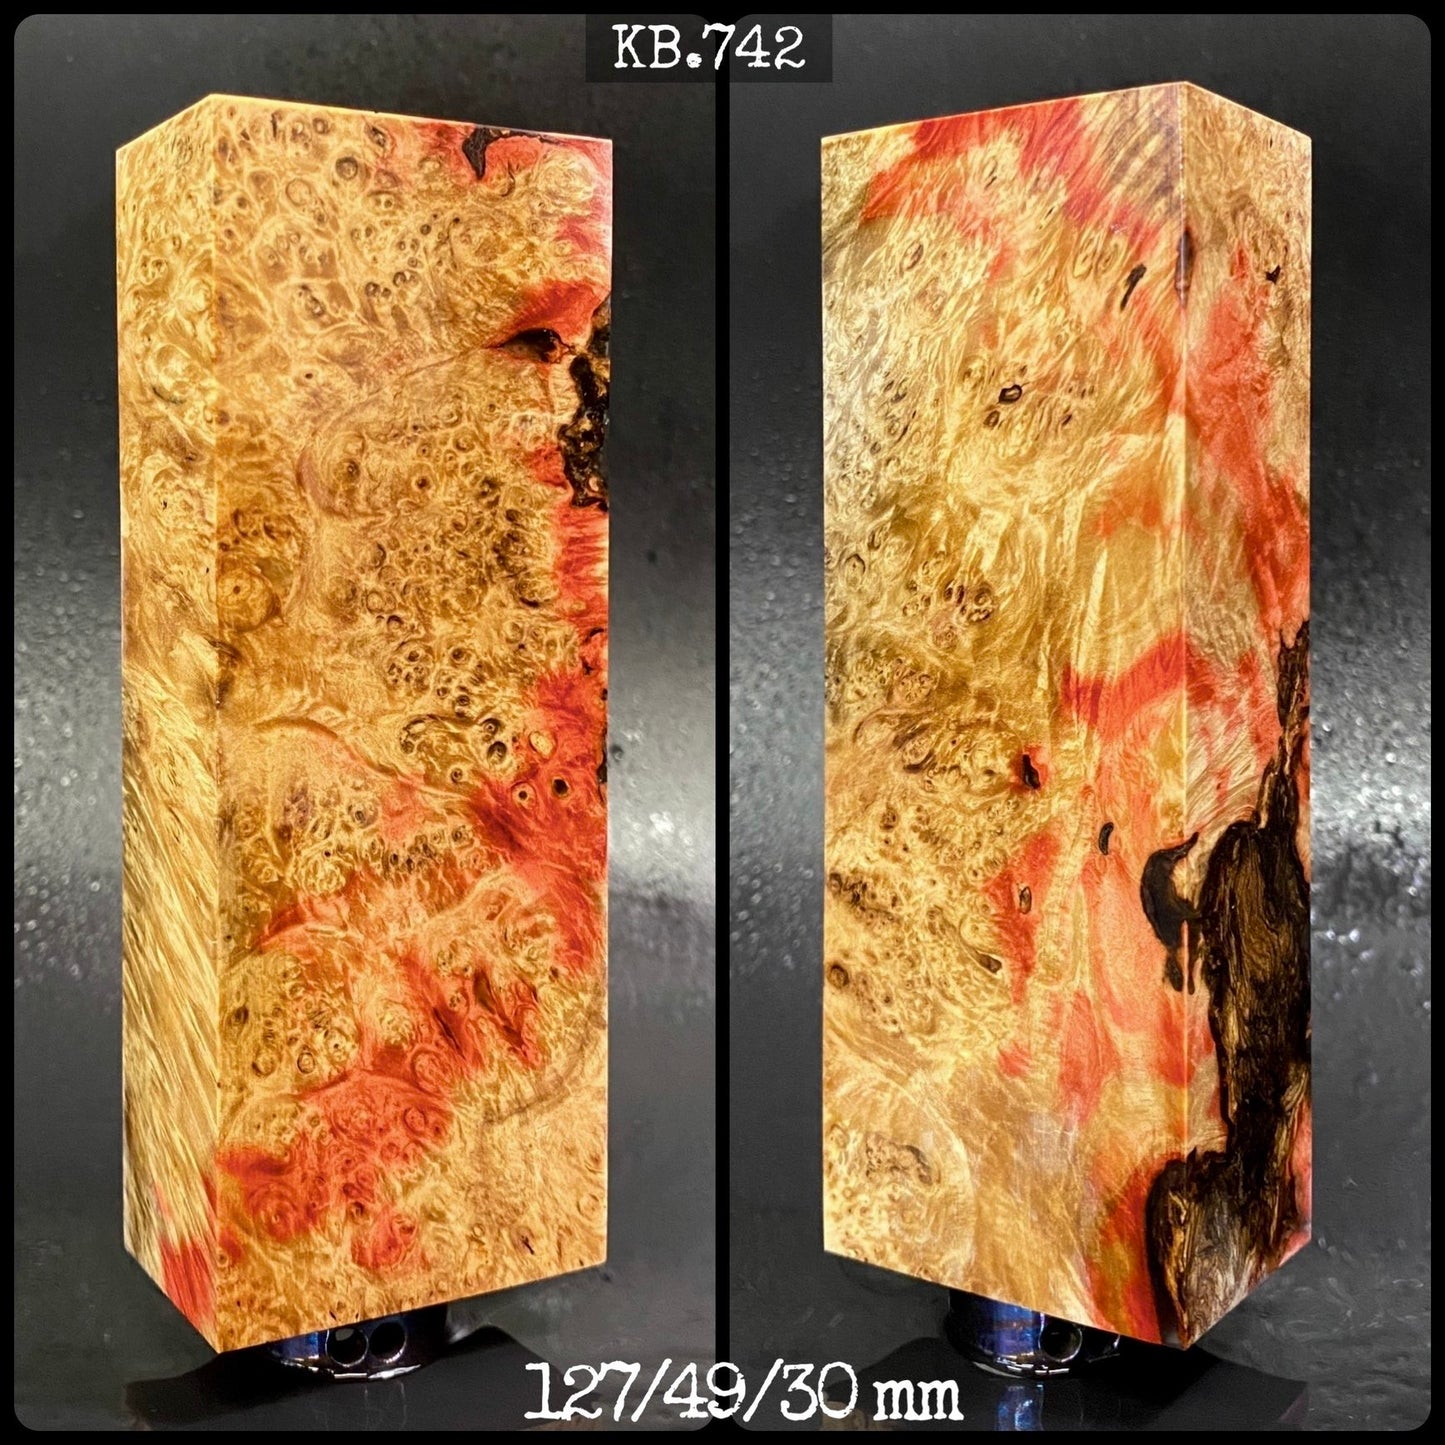 MAPLE BURL Stabilized Wood, Natural Color Blanks for Woodworking. France Stock.